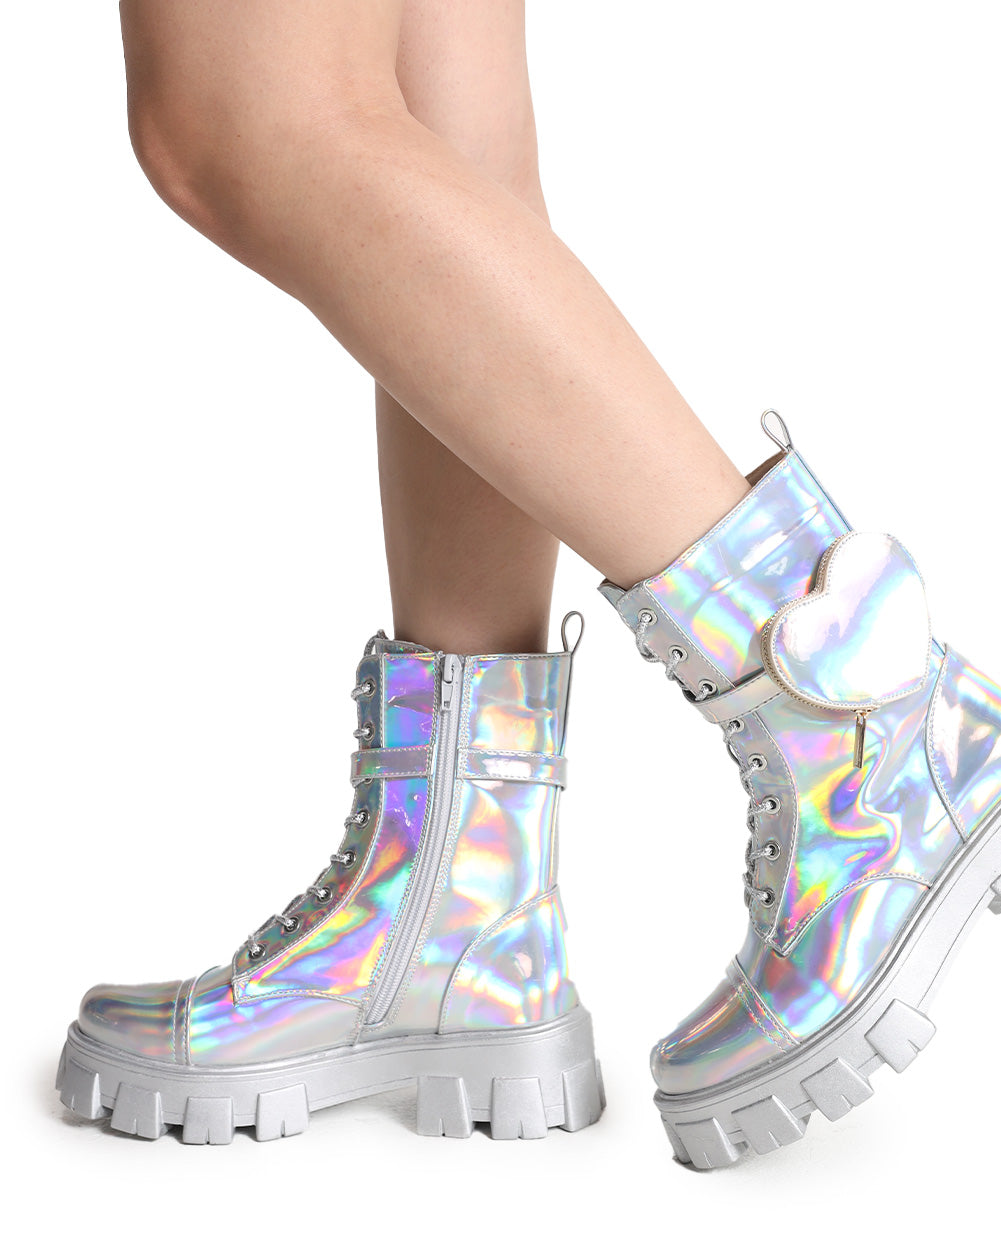 iHeartRaves Lovestruck Holo Combat Boots with Pocket-Rainbow/Silver-Side